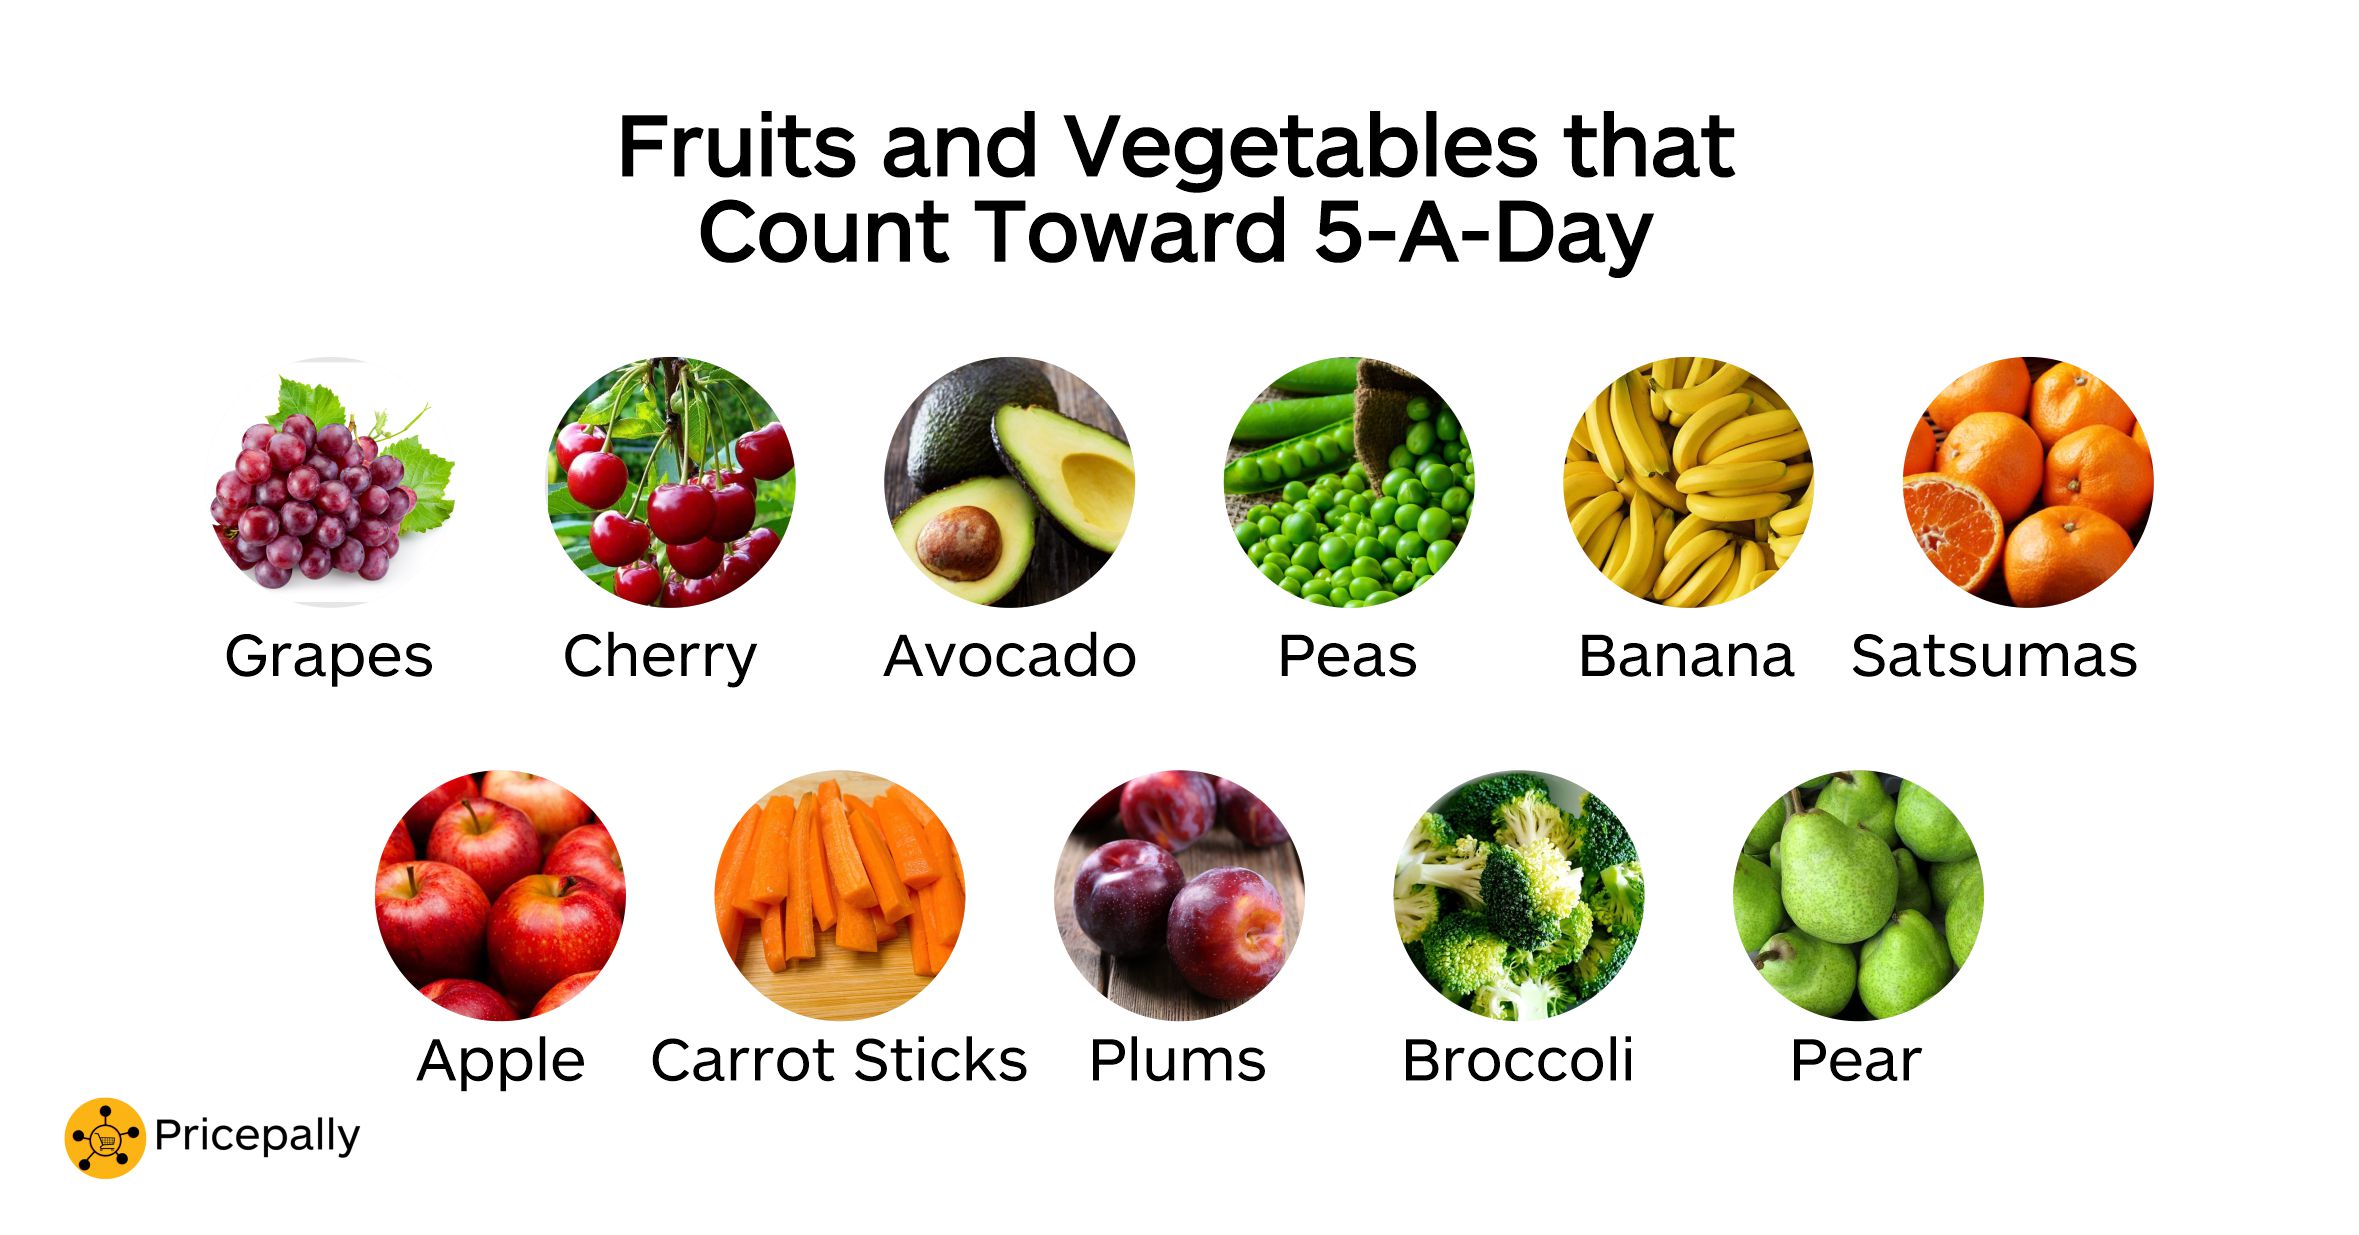 Fruits and vegetables that count toward 5-A-Day diet that busy professionals in Nigeria should follow to build healthy eating habits